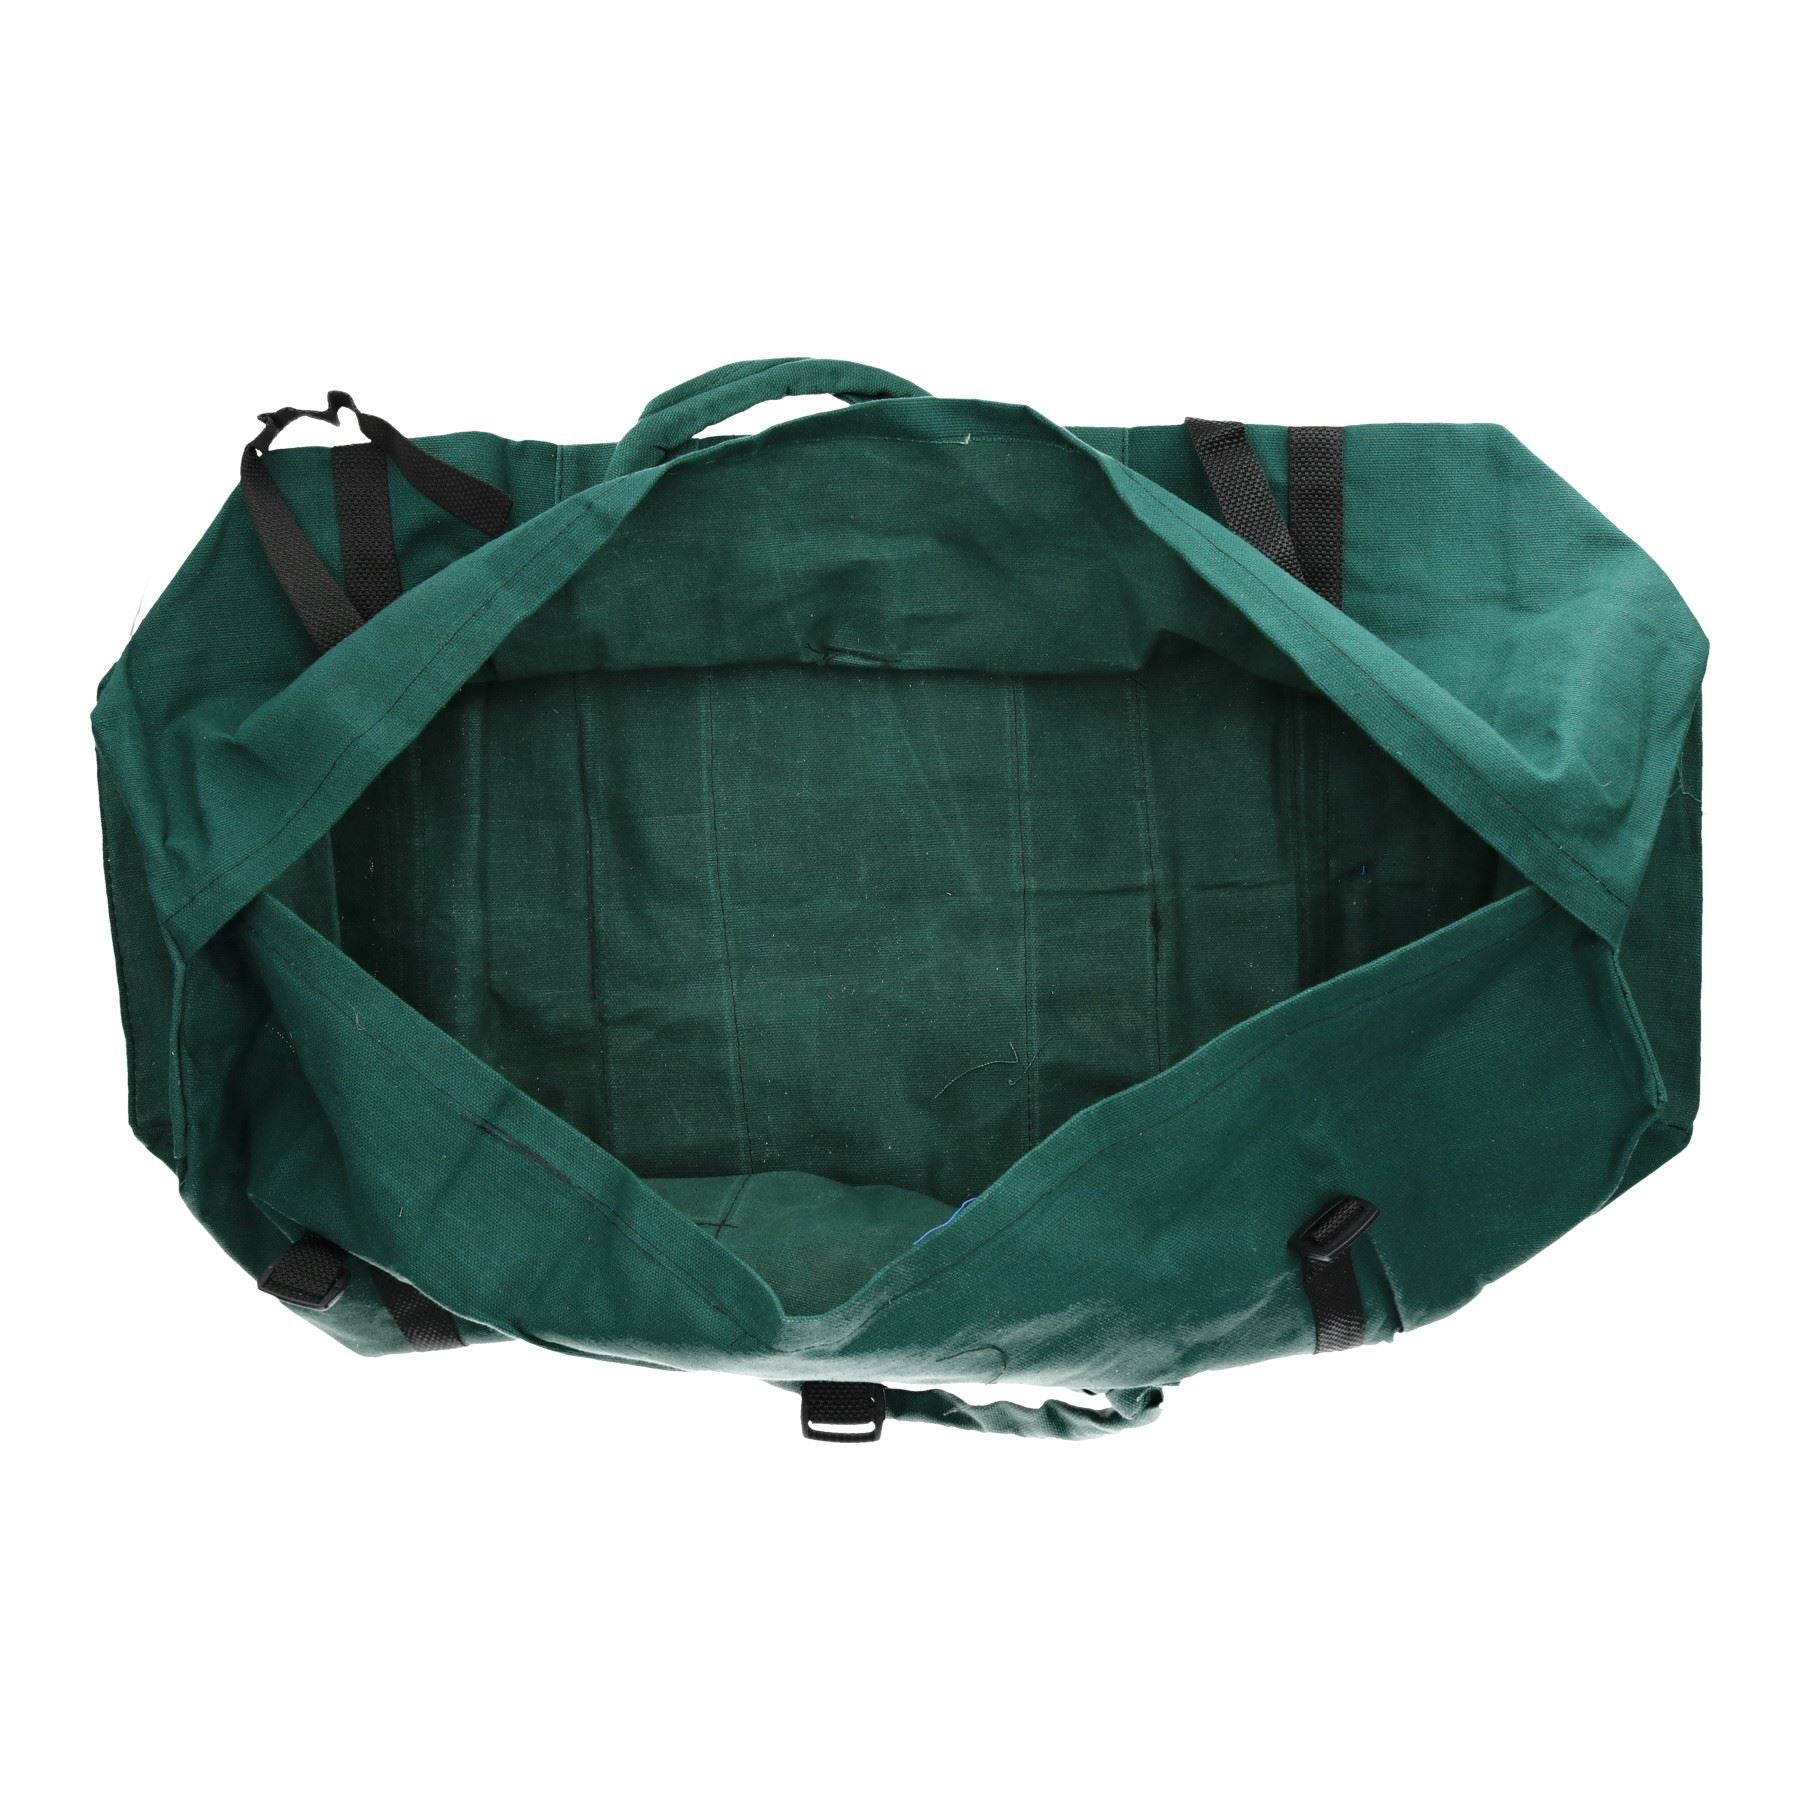 30" Canvas Tool Carry Bag Storage Holder 760 x 216 x 216mm Rope Handles